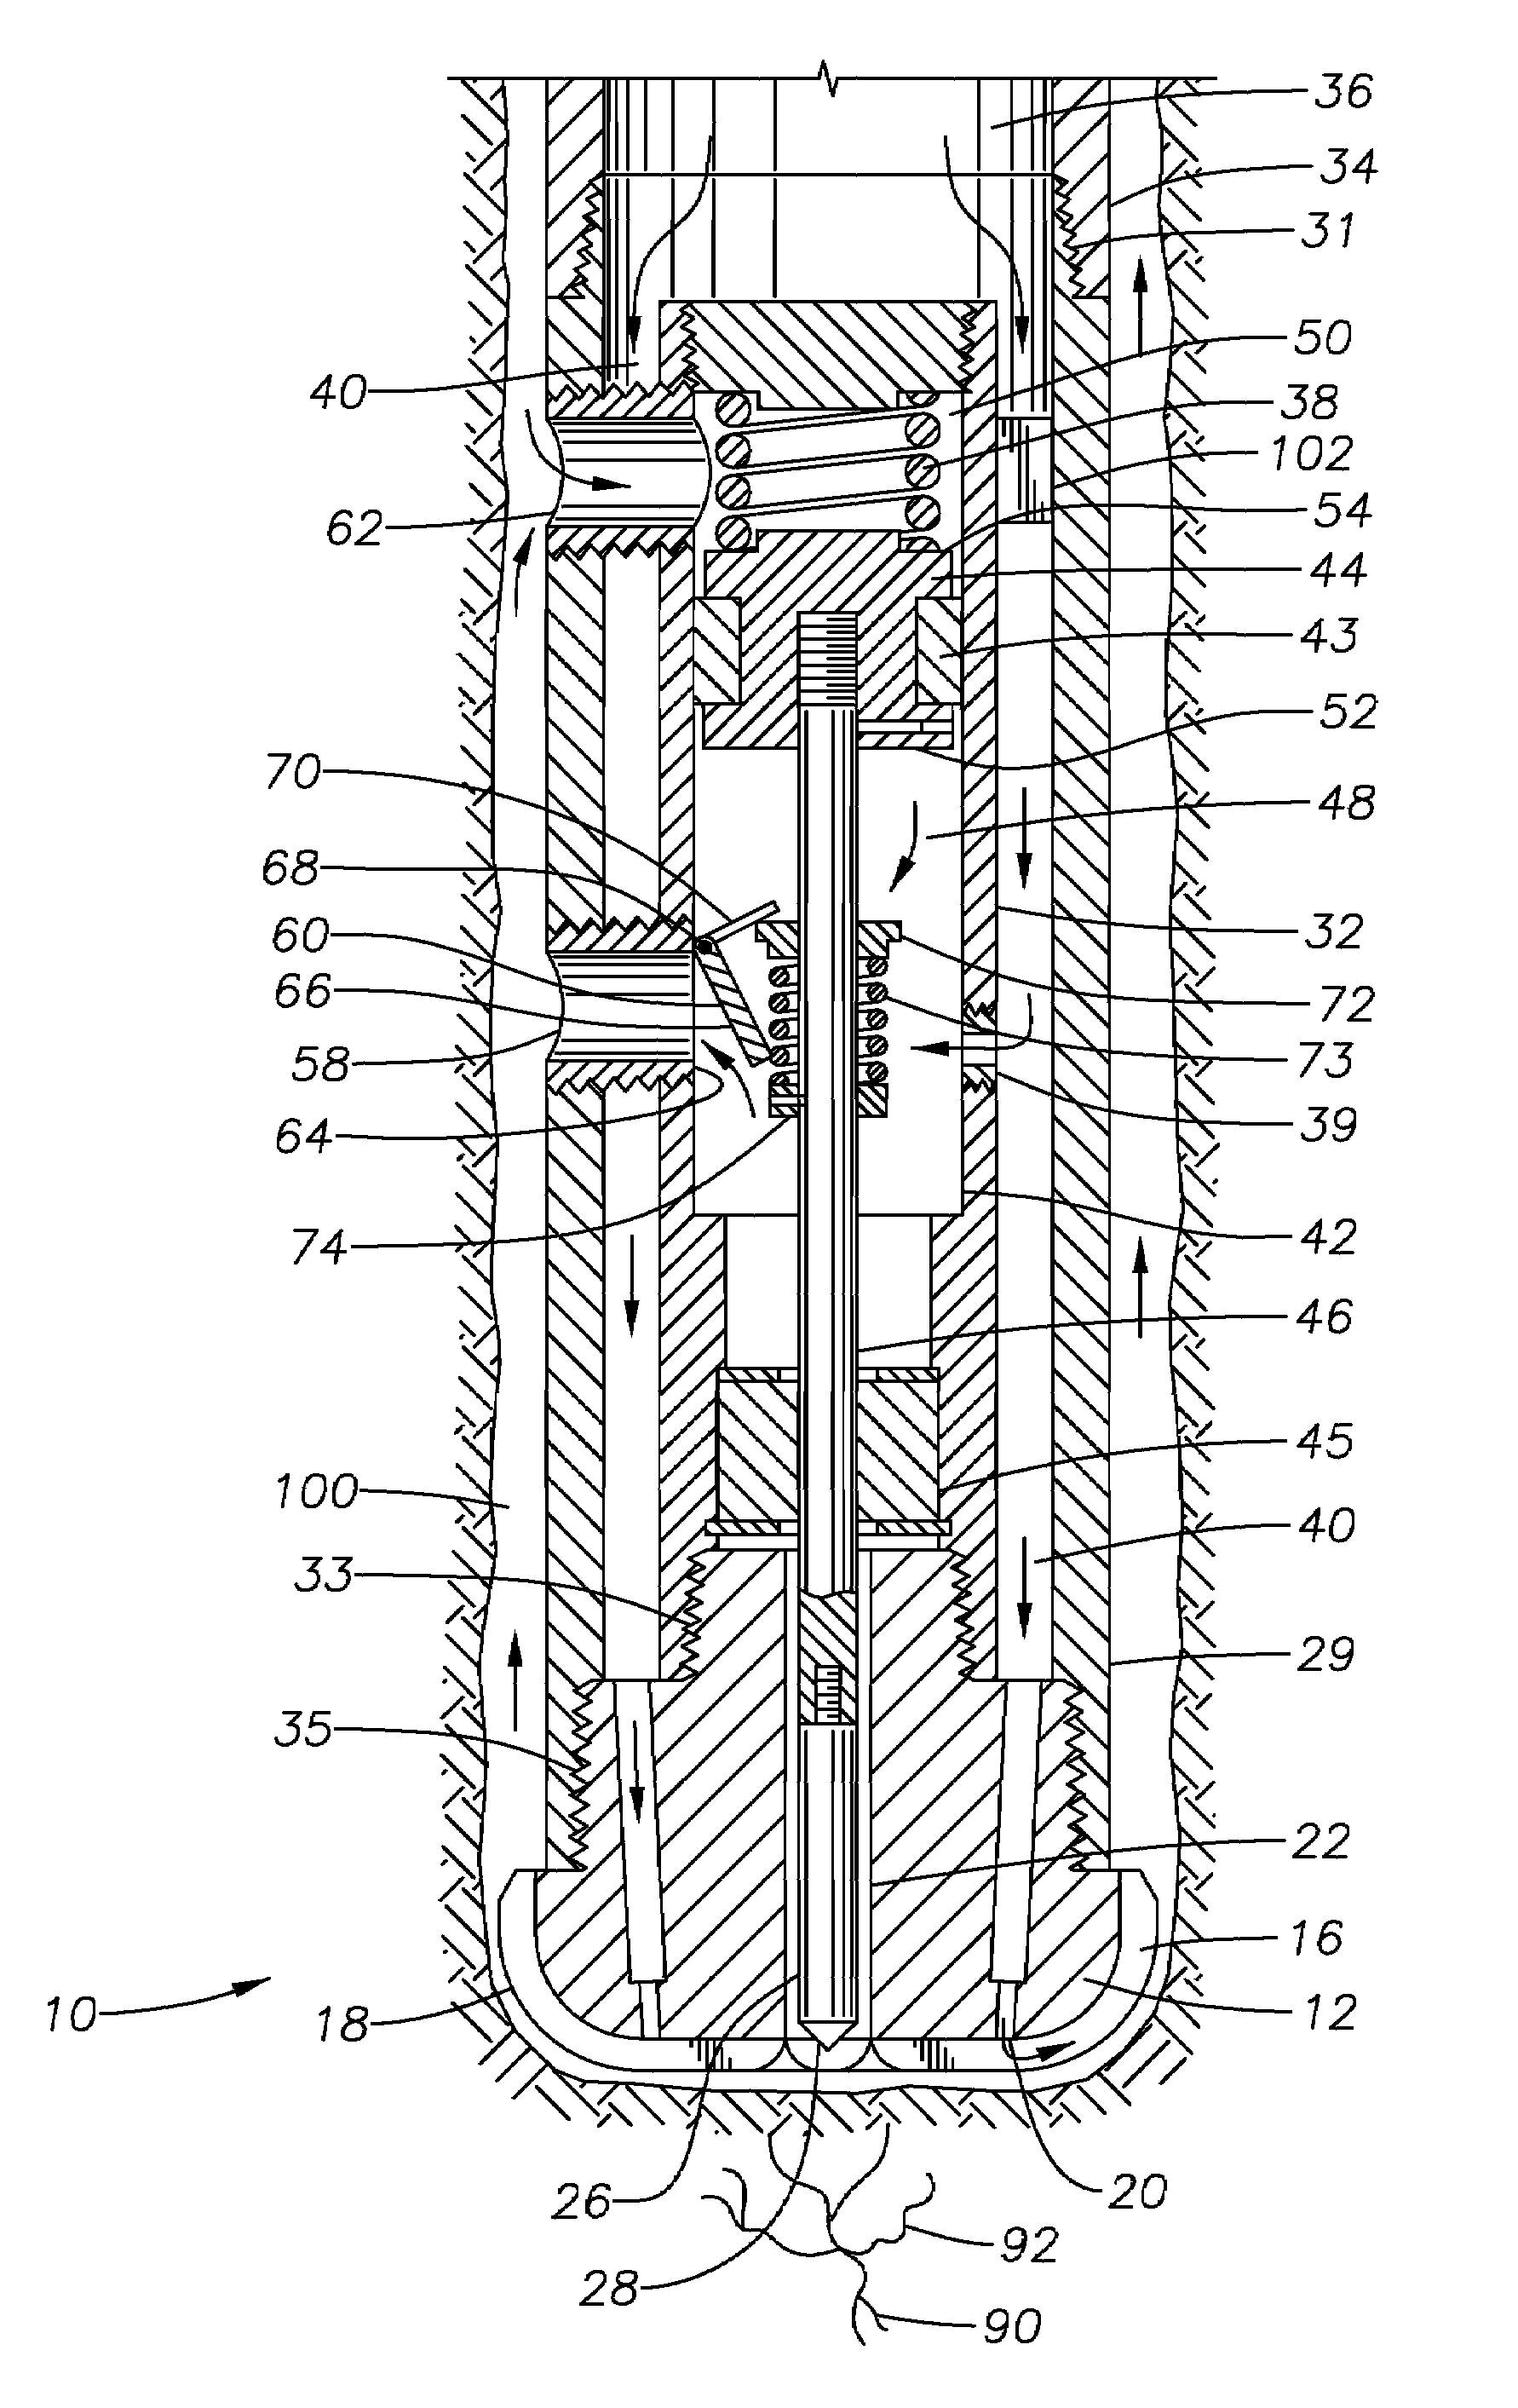 Rotary and mud-powered percussive drill bit assembly and method